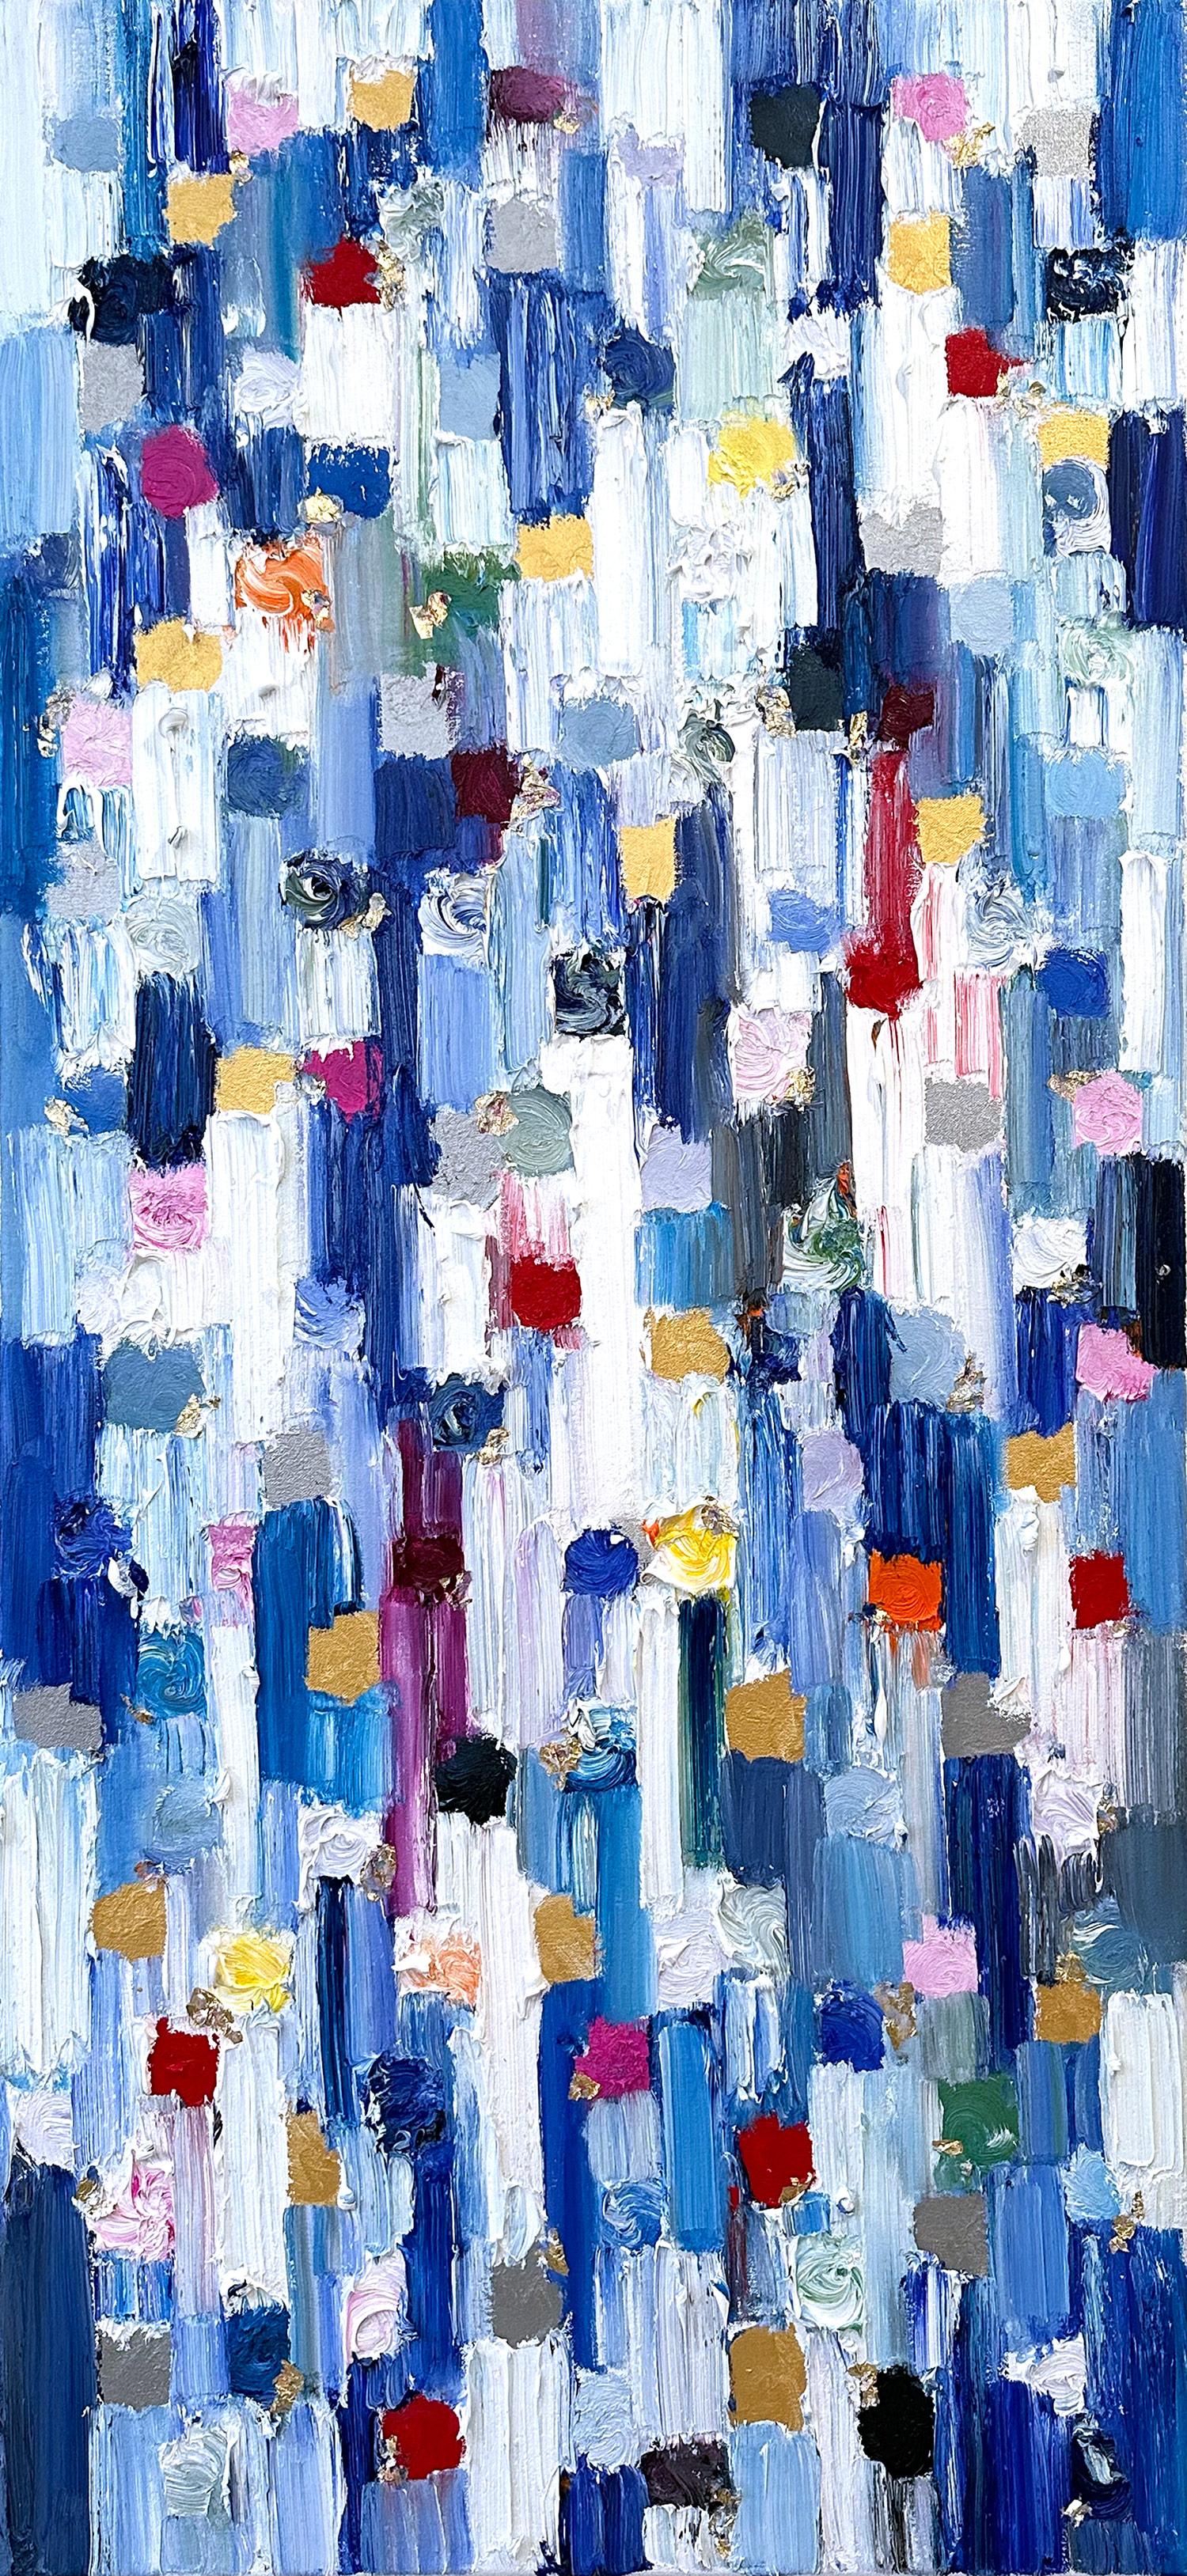 Cindy Shaoul Abstract Painting - "Dripping Dots - Fifth Avenue" Multicolor Contemporary Oil Painting on Canvas